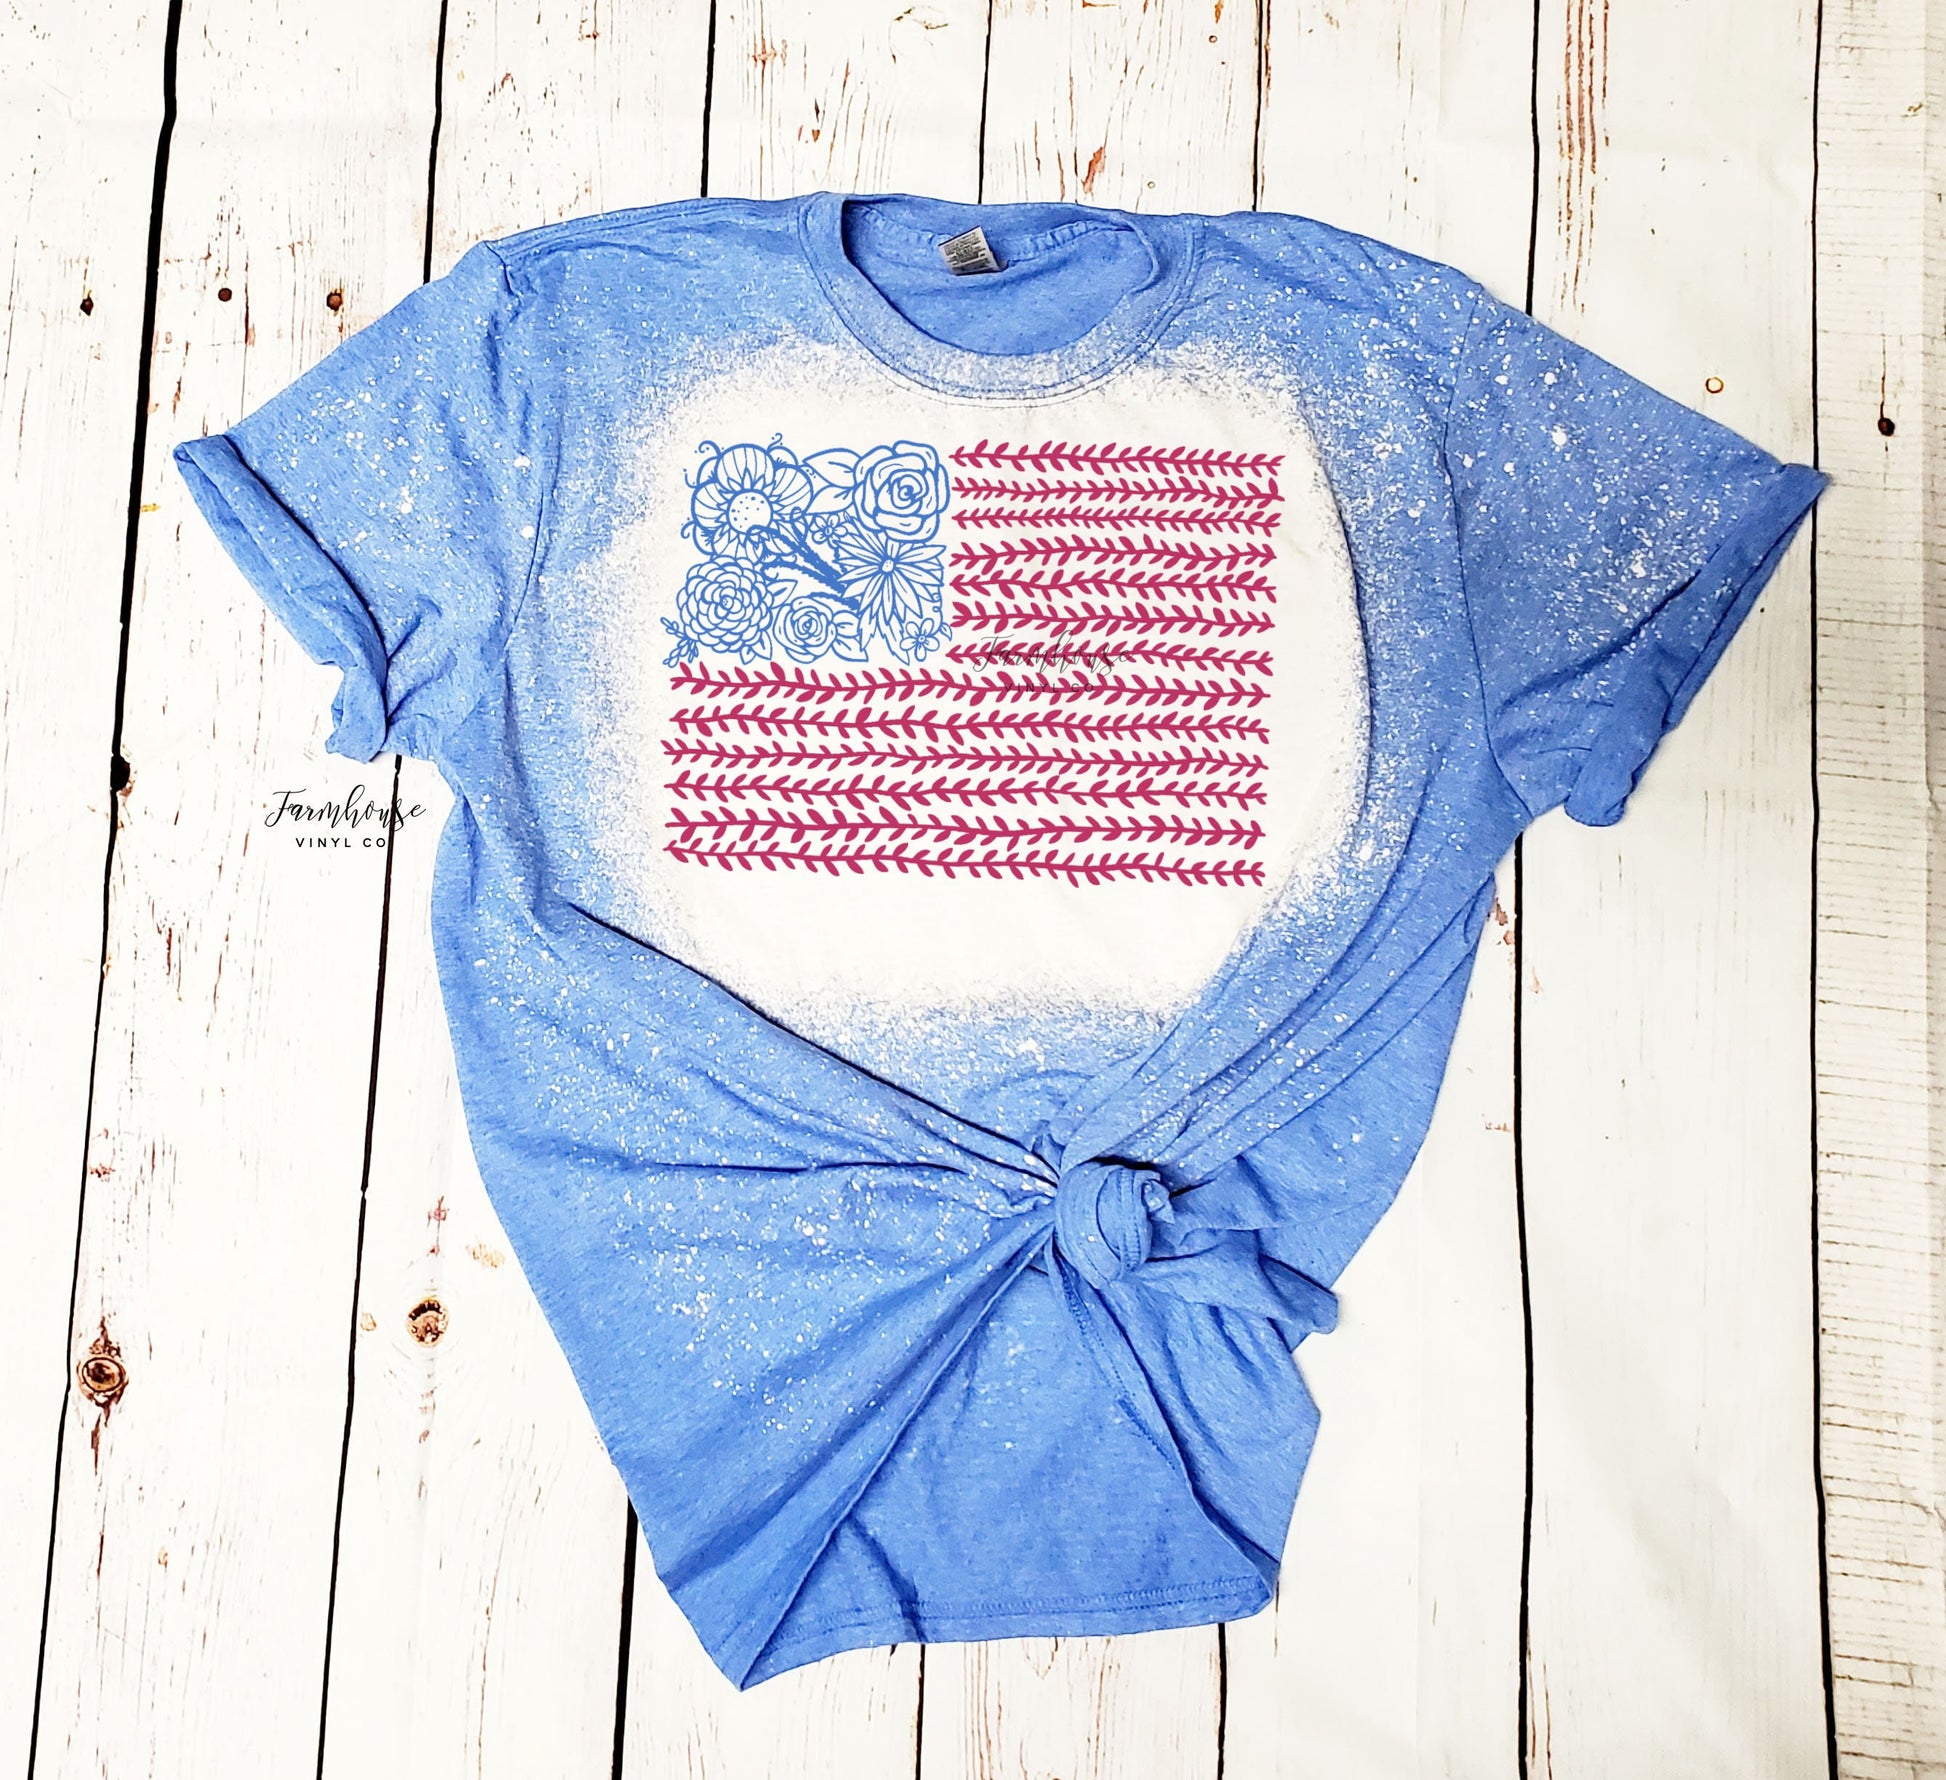 4th of July Floral Flag T Shirt Family Shirts Mommy and Me Shirts Unisex Shirts Matching Family Shirts Floral American Flag Shirt Patriotic - Farmhouse Vinyl Co